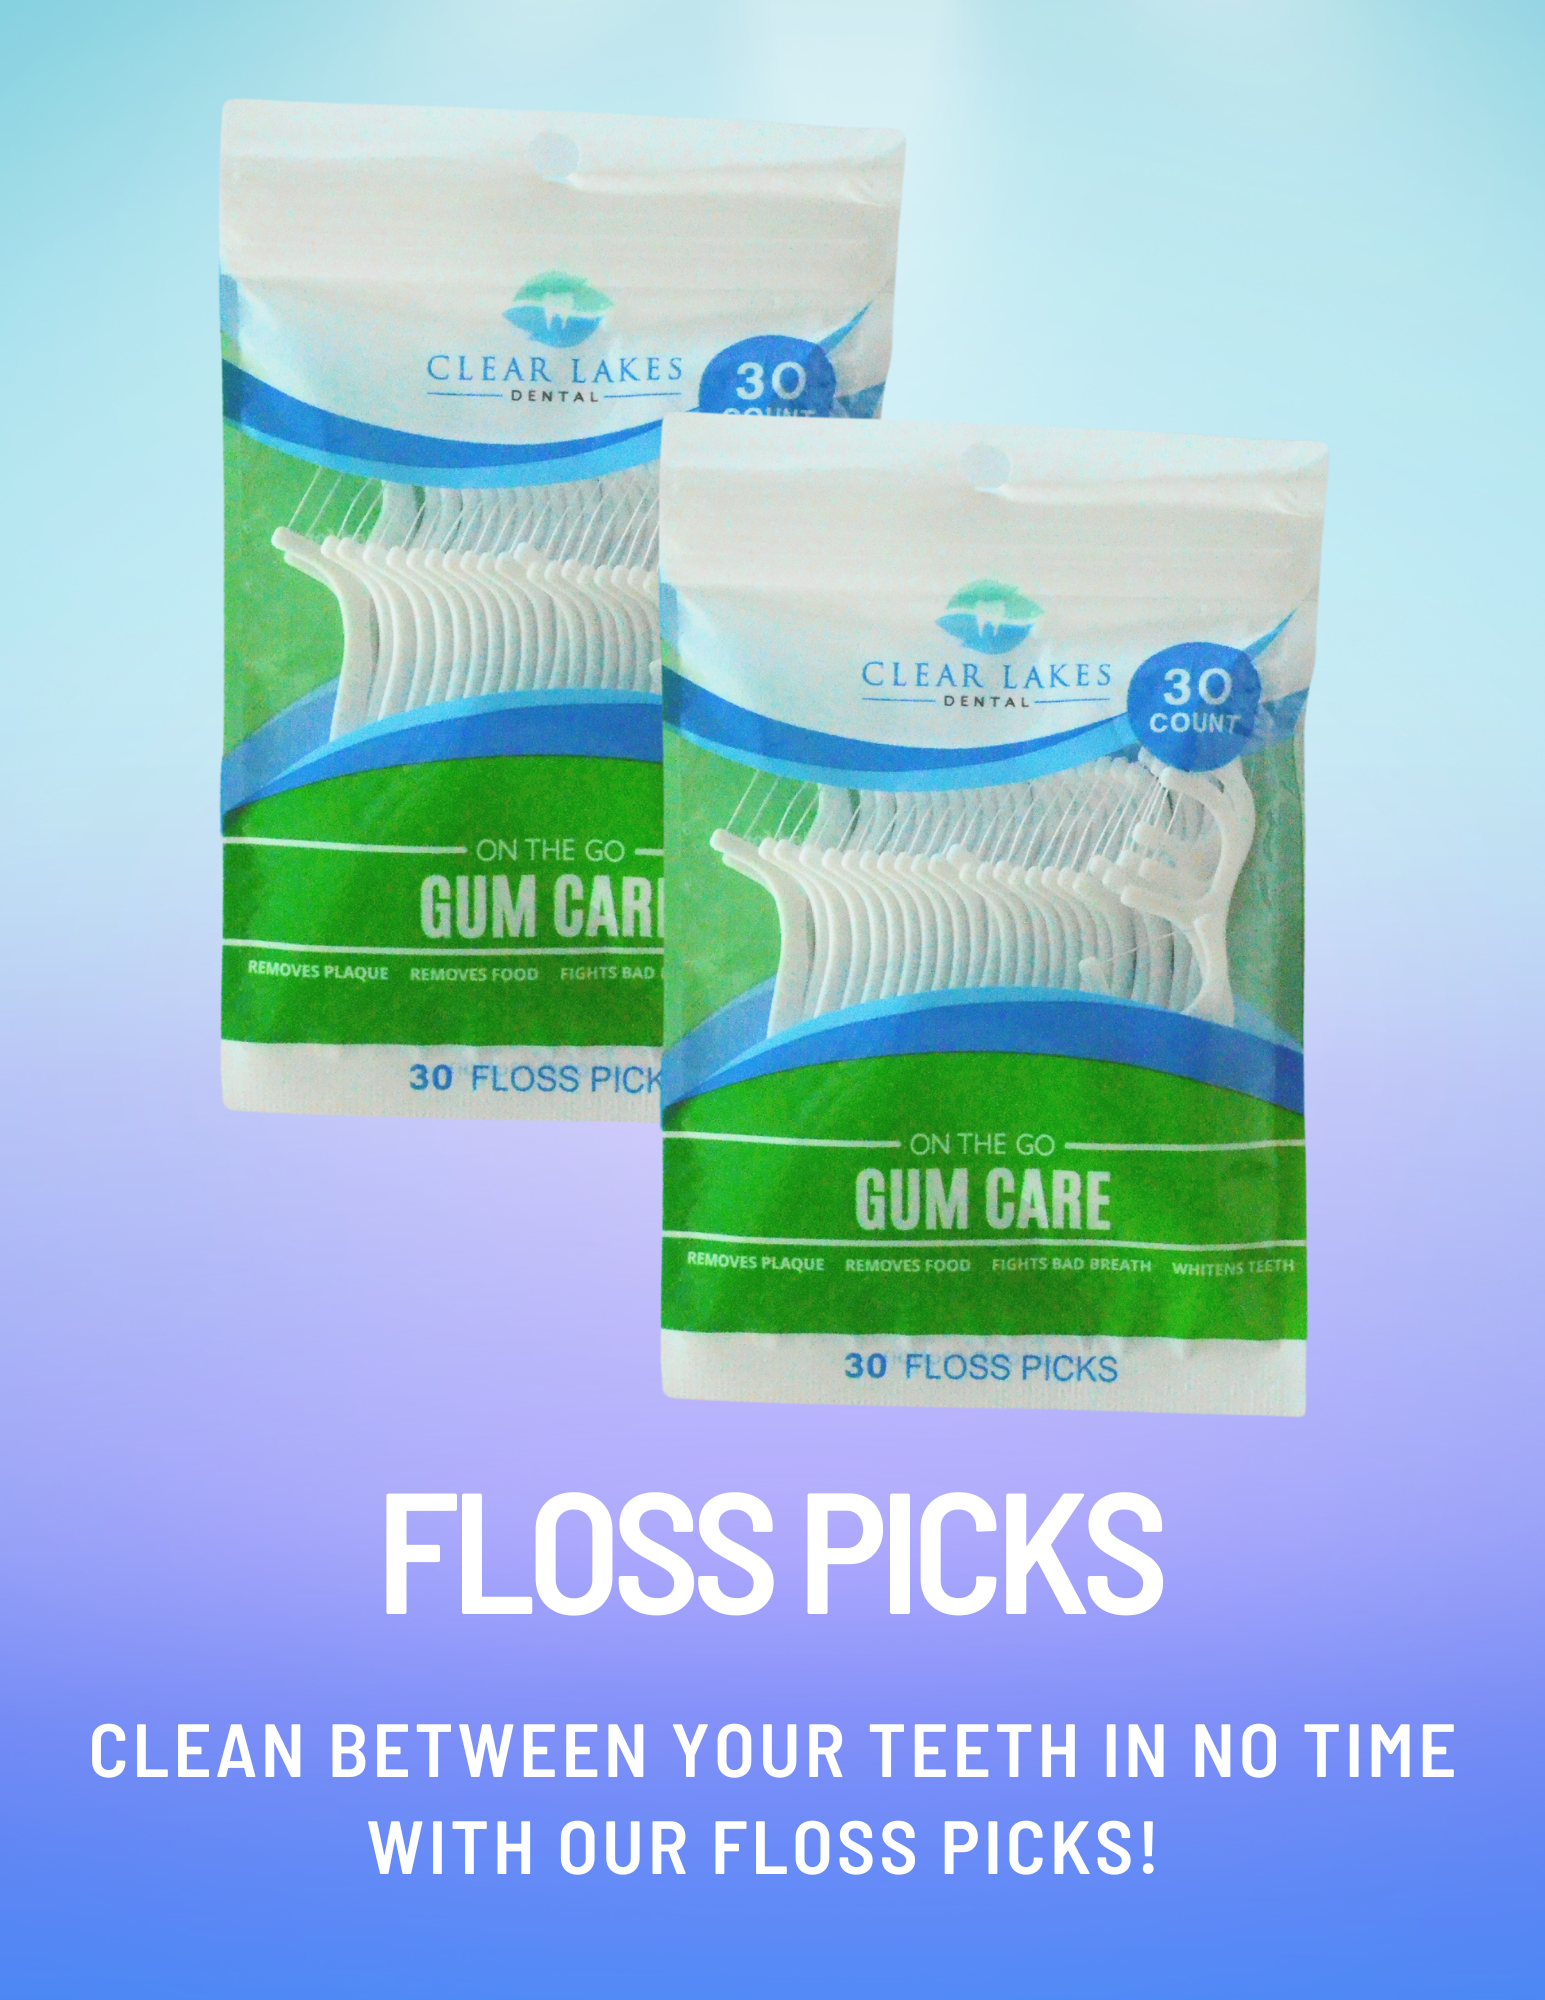 2 Bags of Floss Picks on a blue and purple background with text "Floss Picks - Clean Between Your Teeth In No Time With Our Floss Picks!"